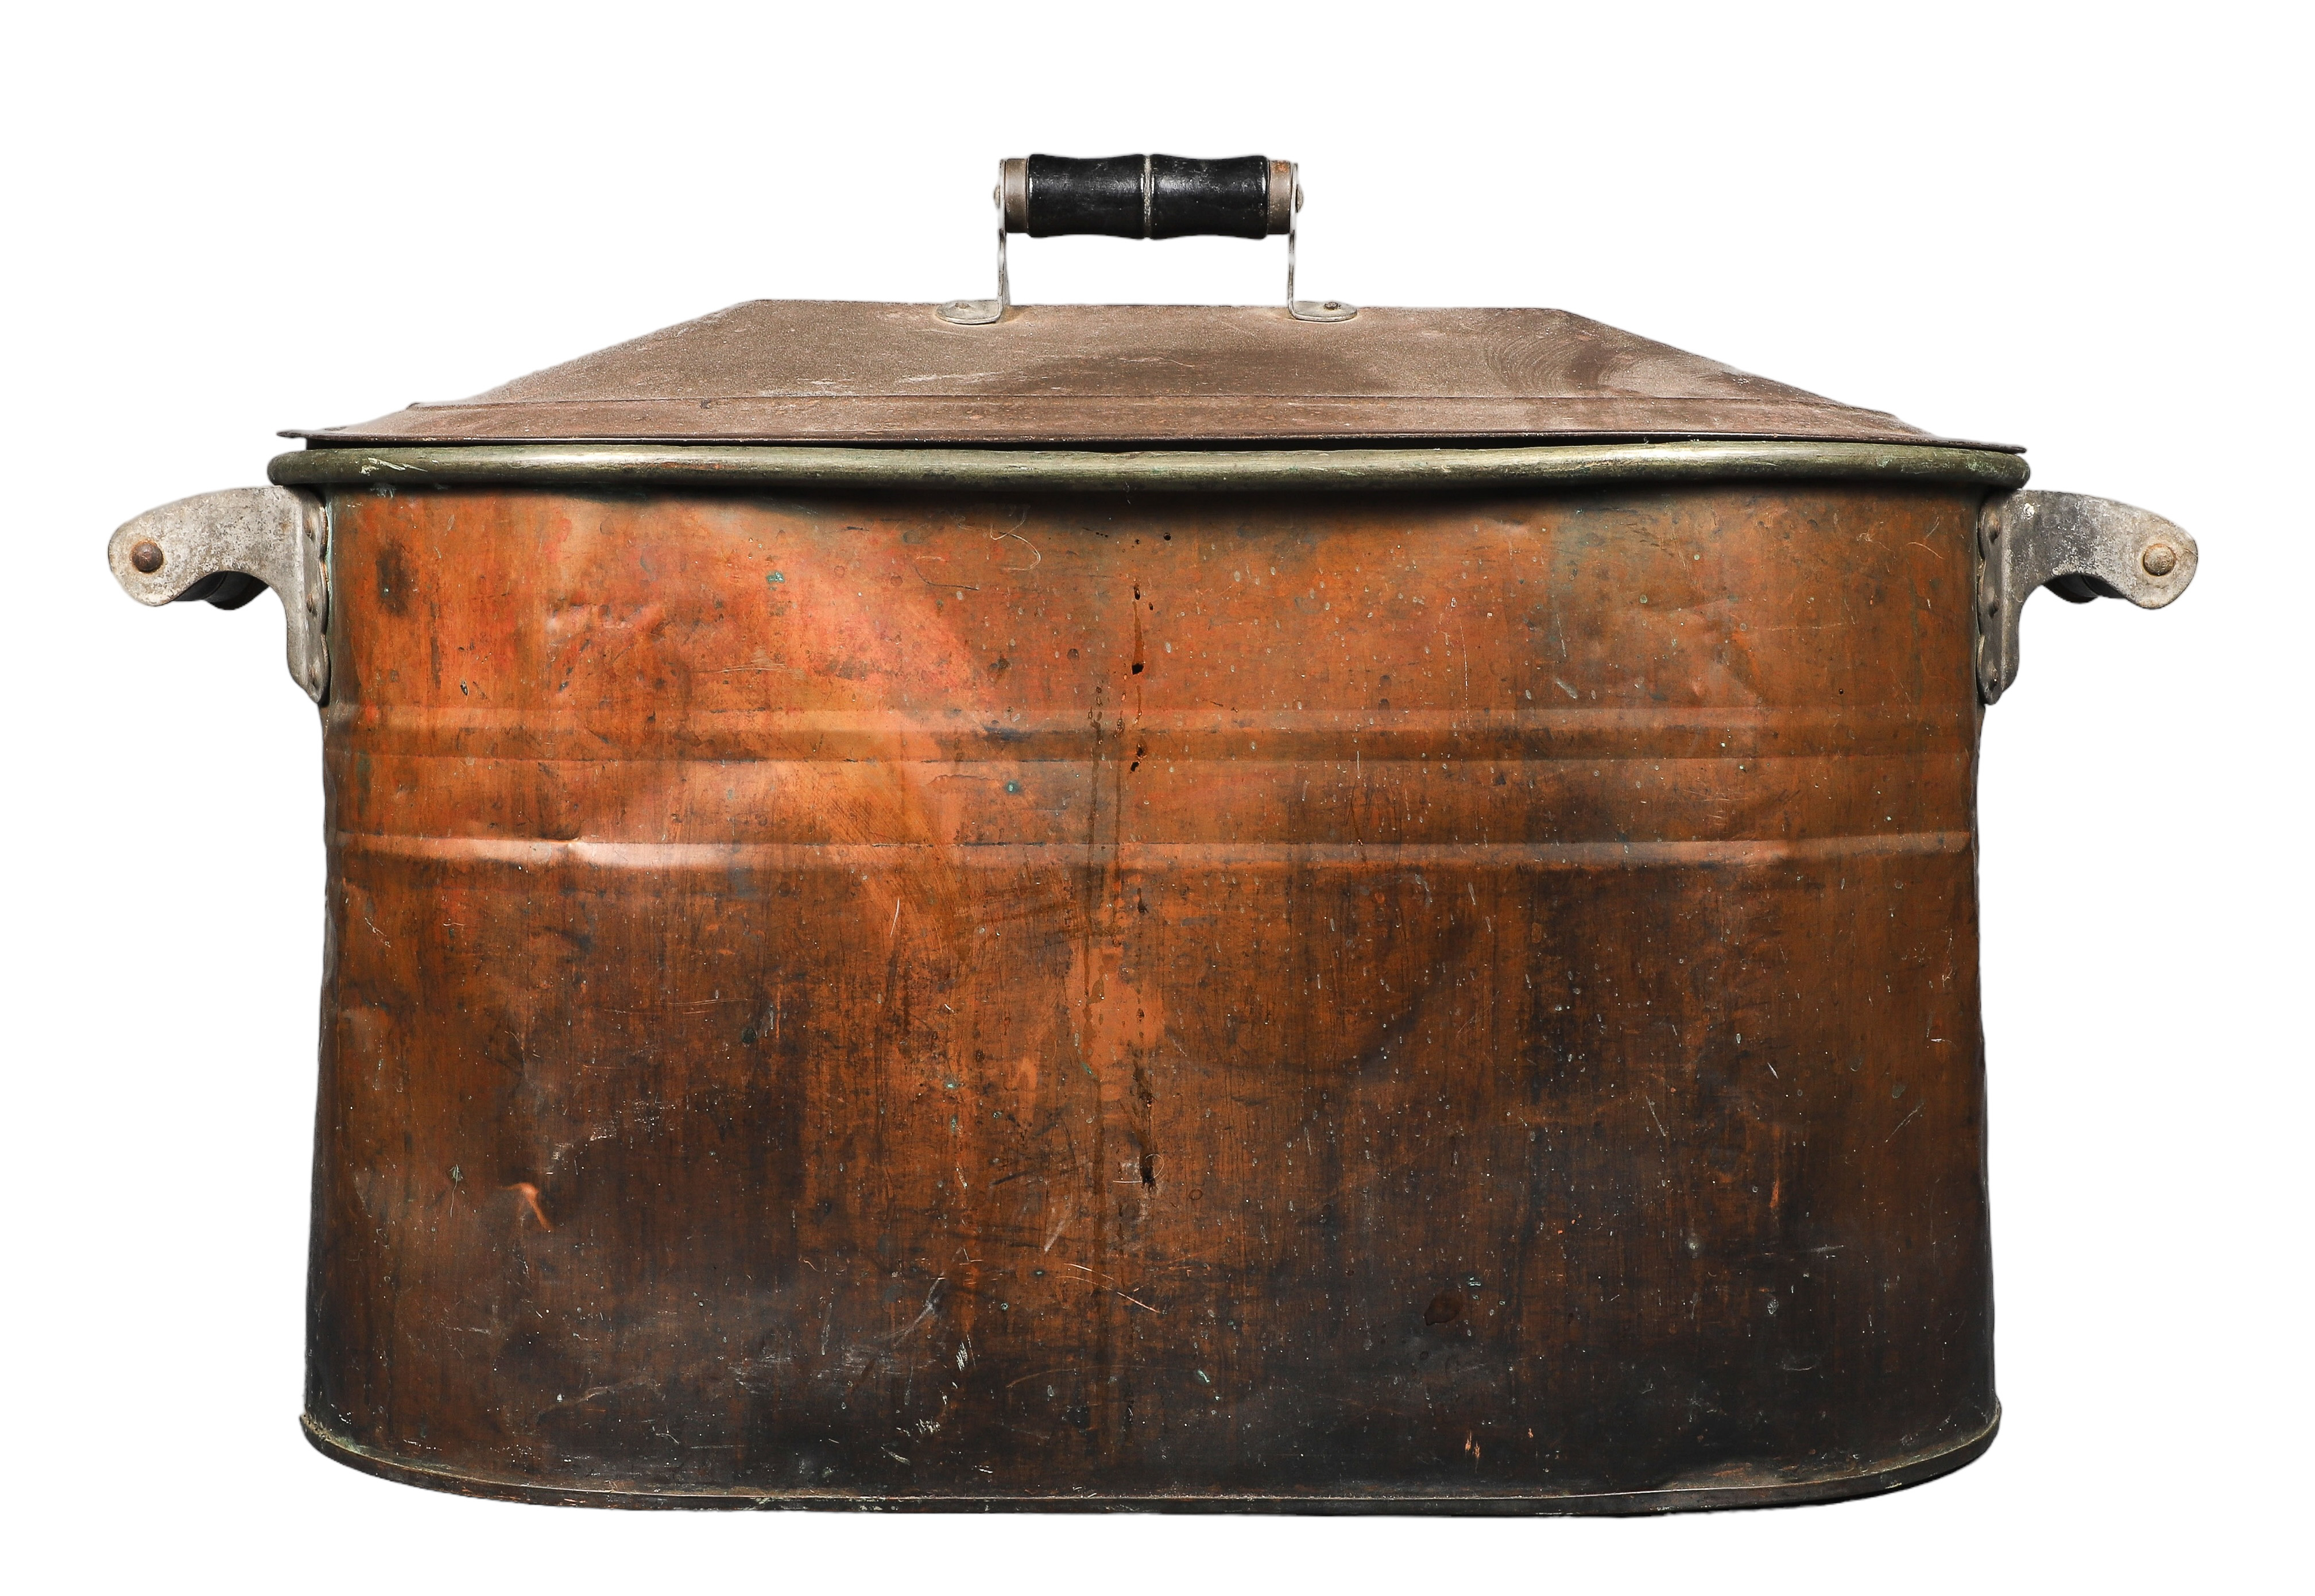 Copper wash boiler with lid, 24"